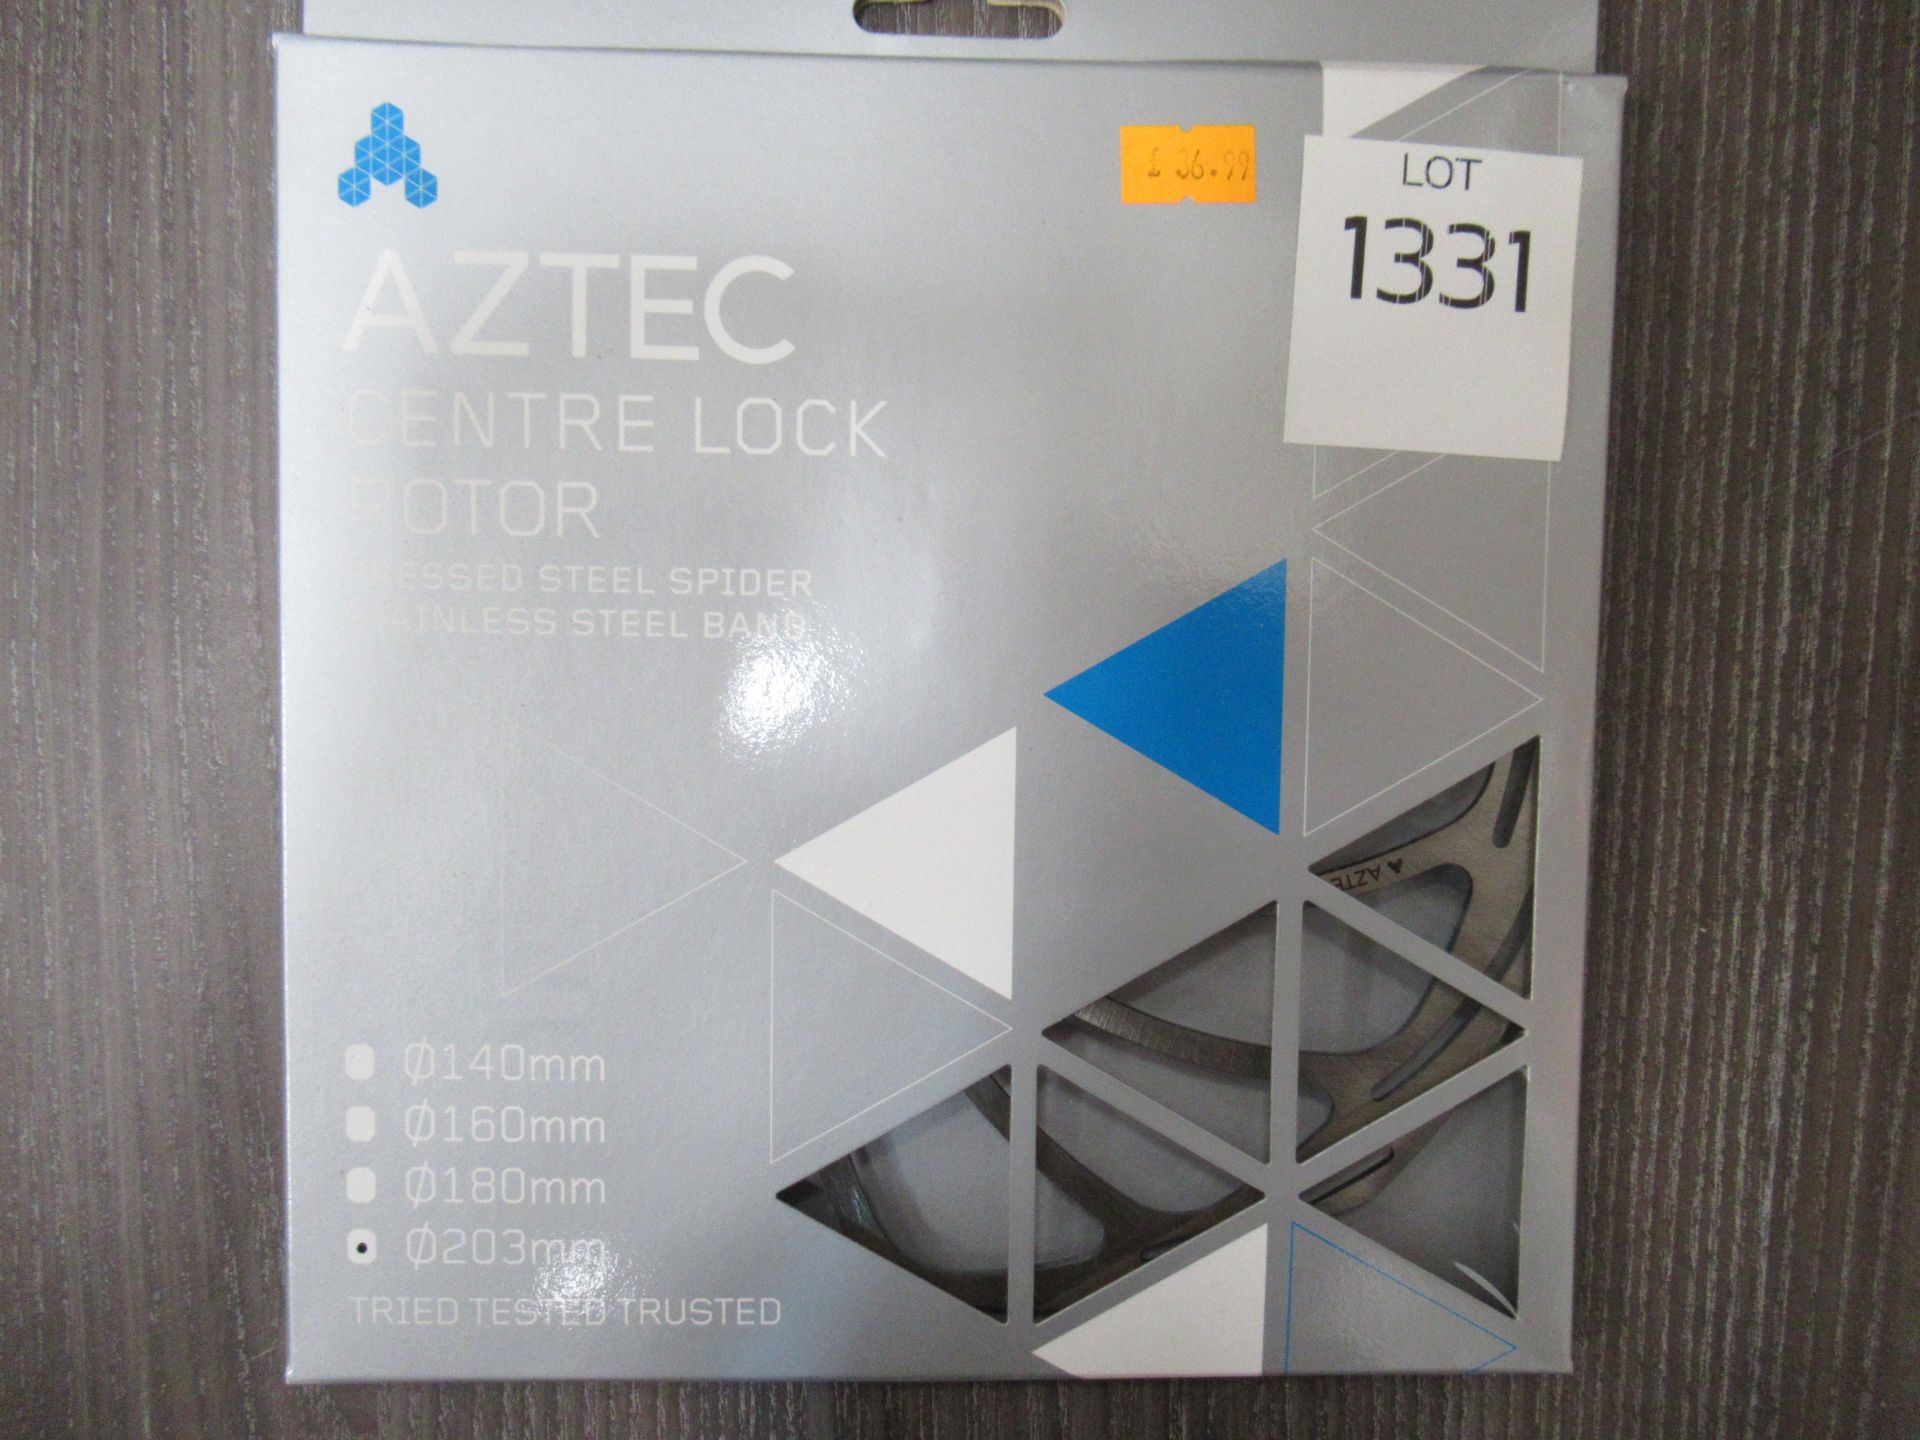 6 x Aztec Centre Lock Rotor's: 2 x 160mm (RRP£28.99 each); 3 x 180mm (RRP£32.99) and 1 x 203mm (RRP£ - Image 4 of 13